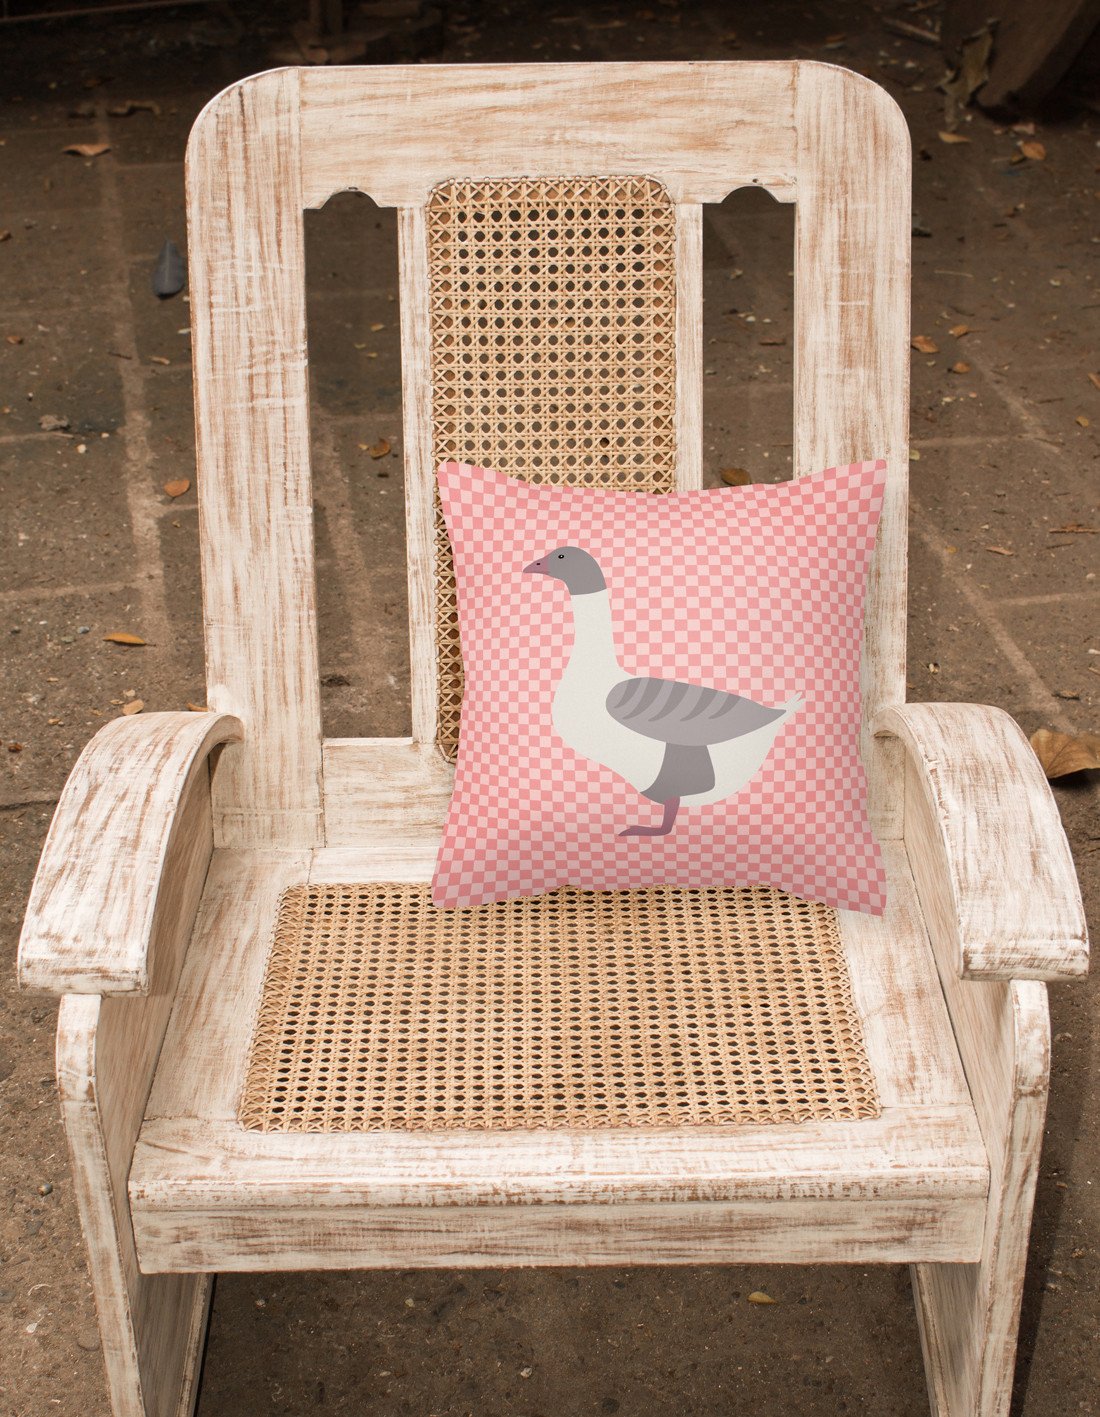 Buff Grey Back Goose Pink Check Fabric Decorative Pillow BB7901PW1818 by Caroline's Treasures